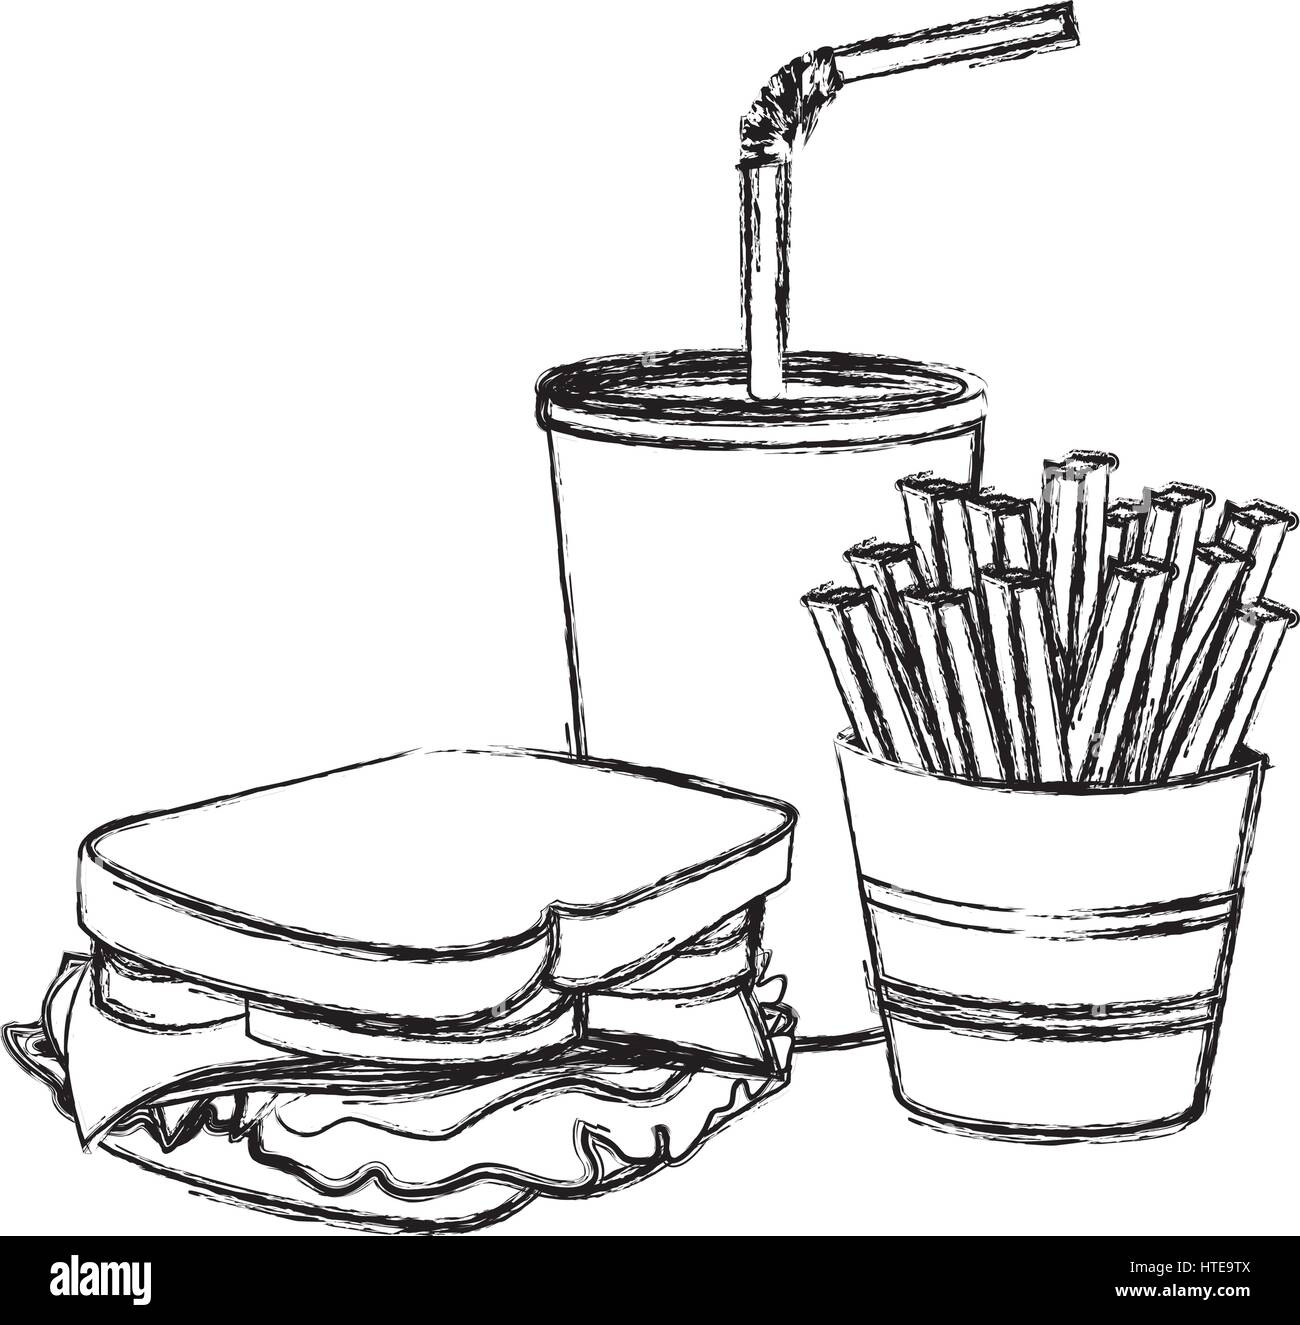 monochrome sketch of sandwich with french fries and soda Stock Vector